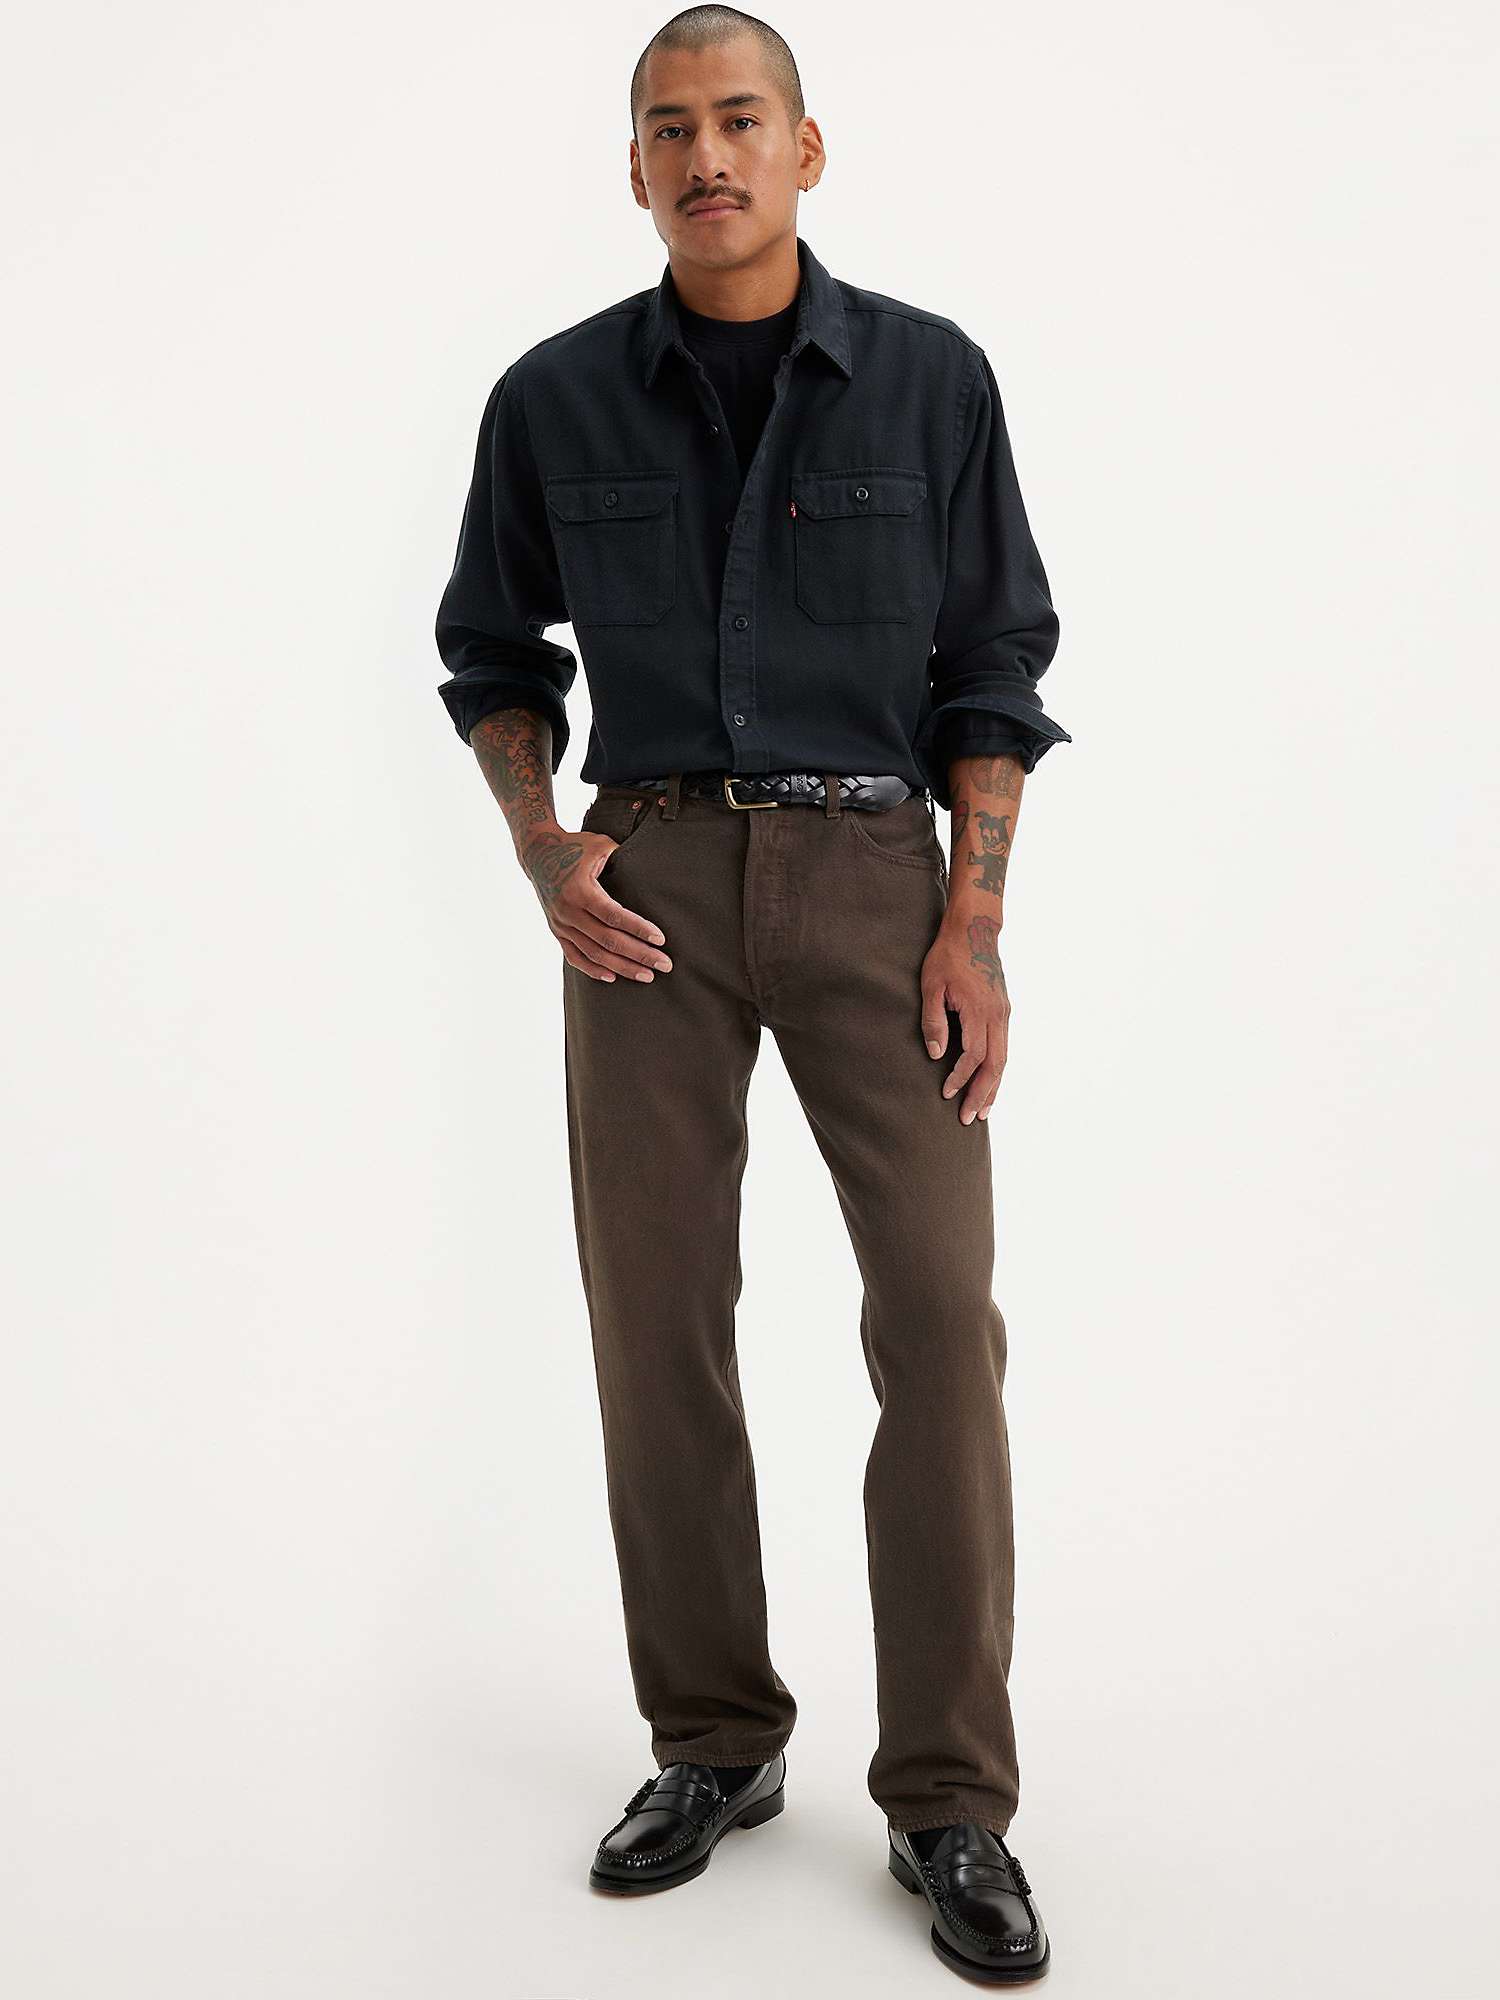 Buy Levi's 501 Original Straight Jeans, Brown Chocolate Online at johnlewis.com